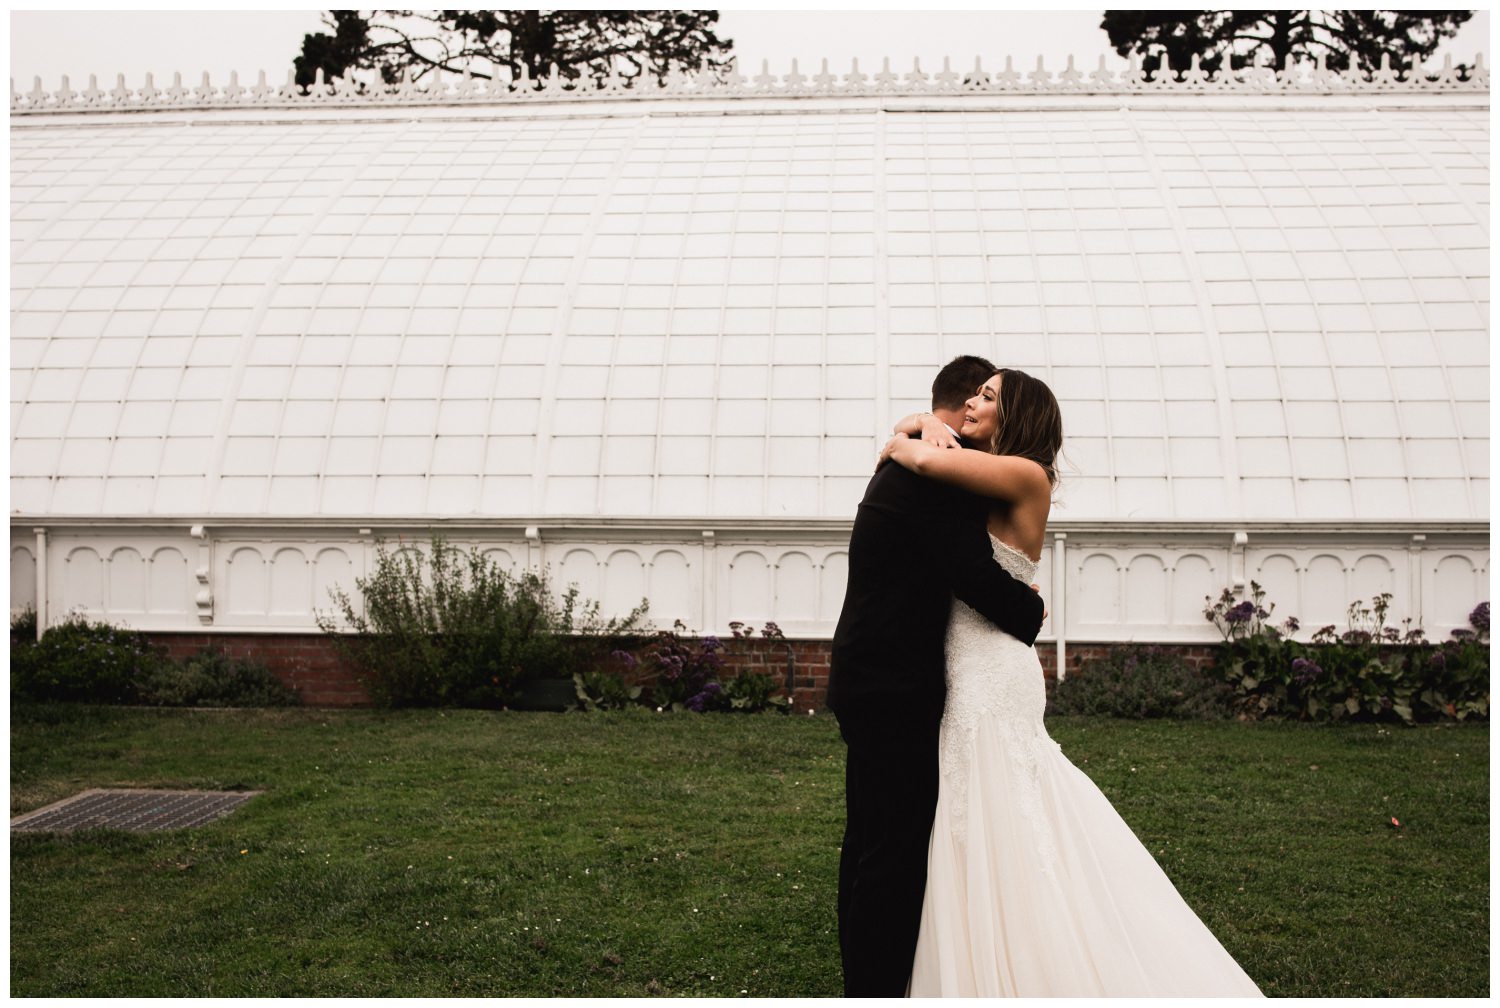 San Francisco Wedding at the Conservatory of Flowers